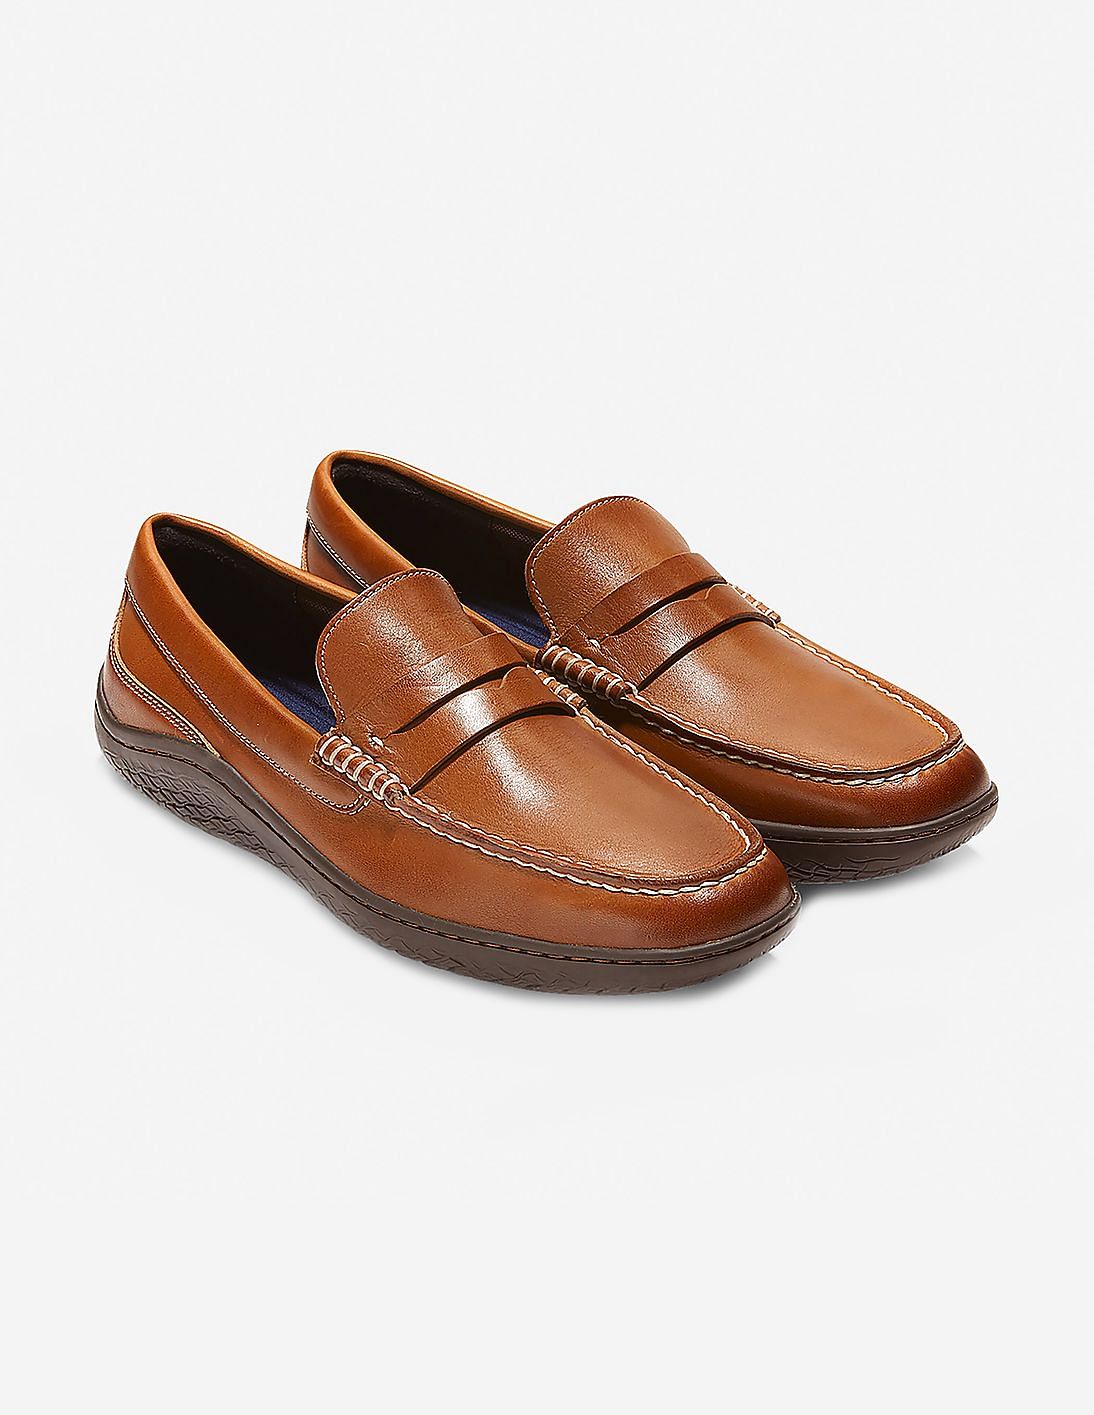 cole haan motogrand loafer